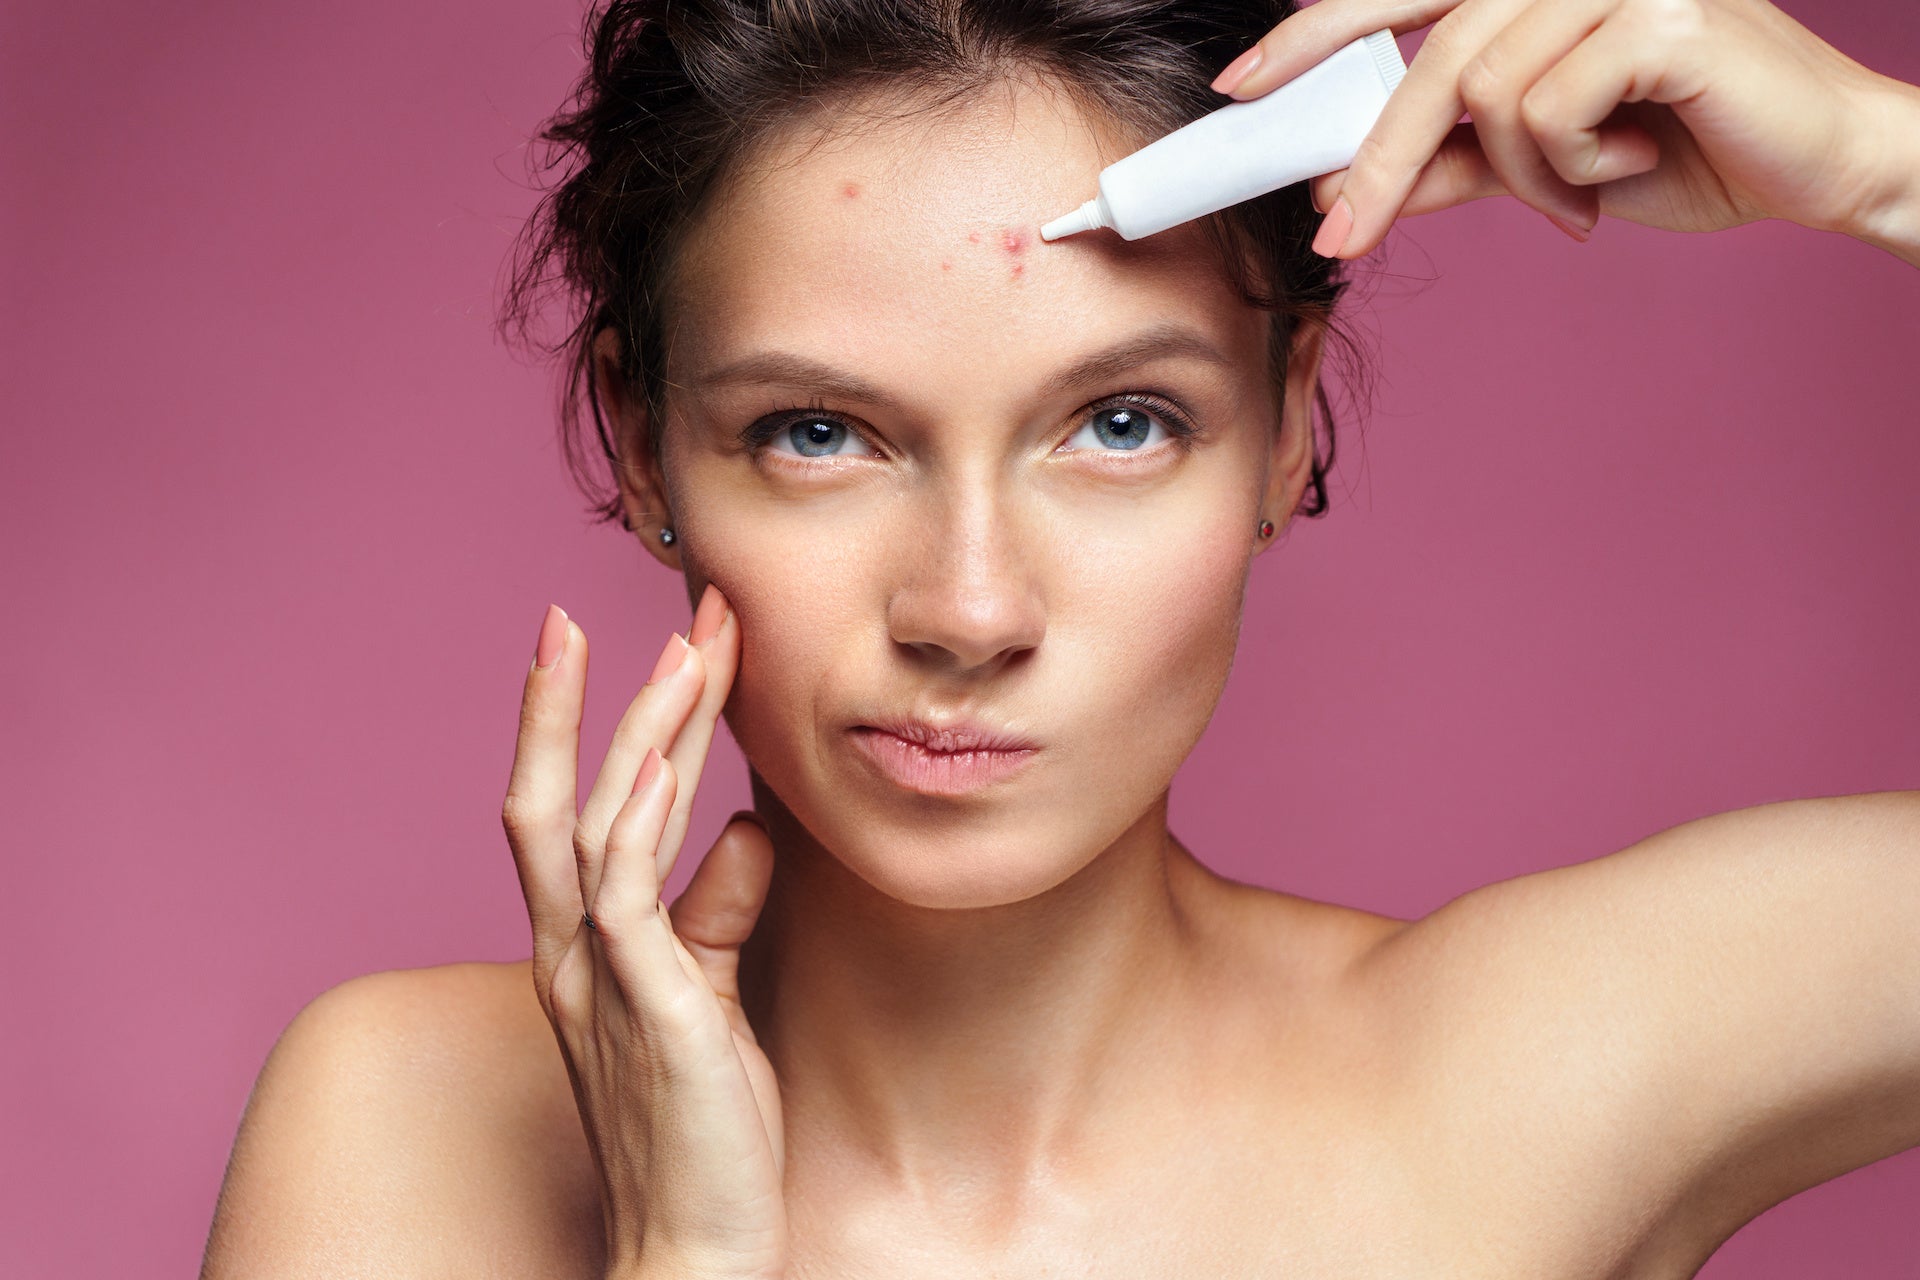 Acne 101 - What is acne?